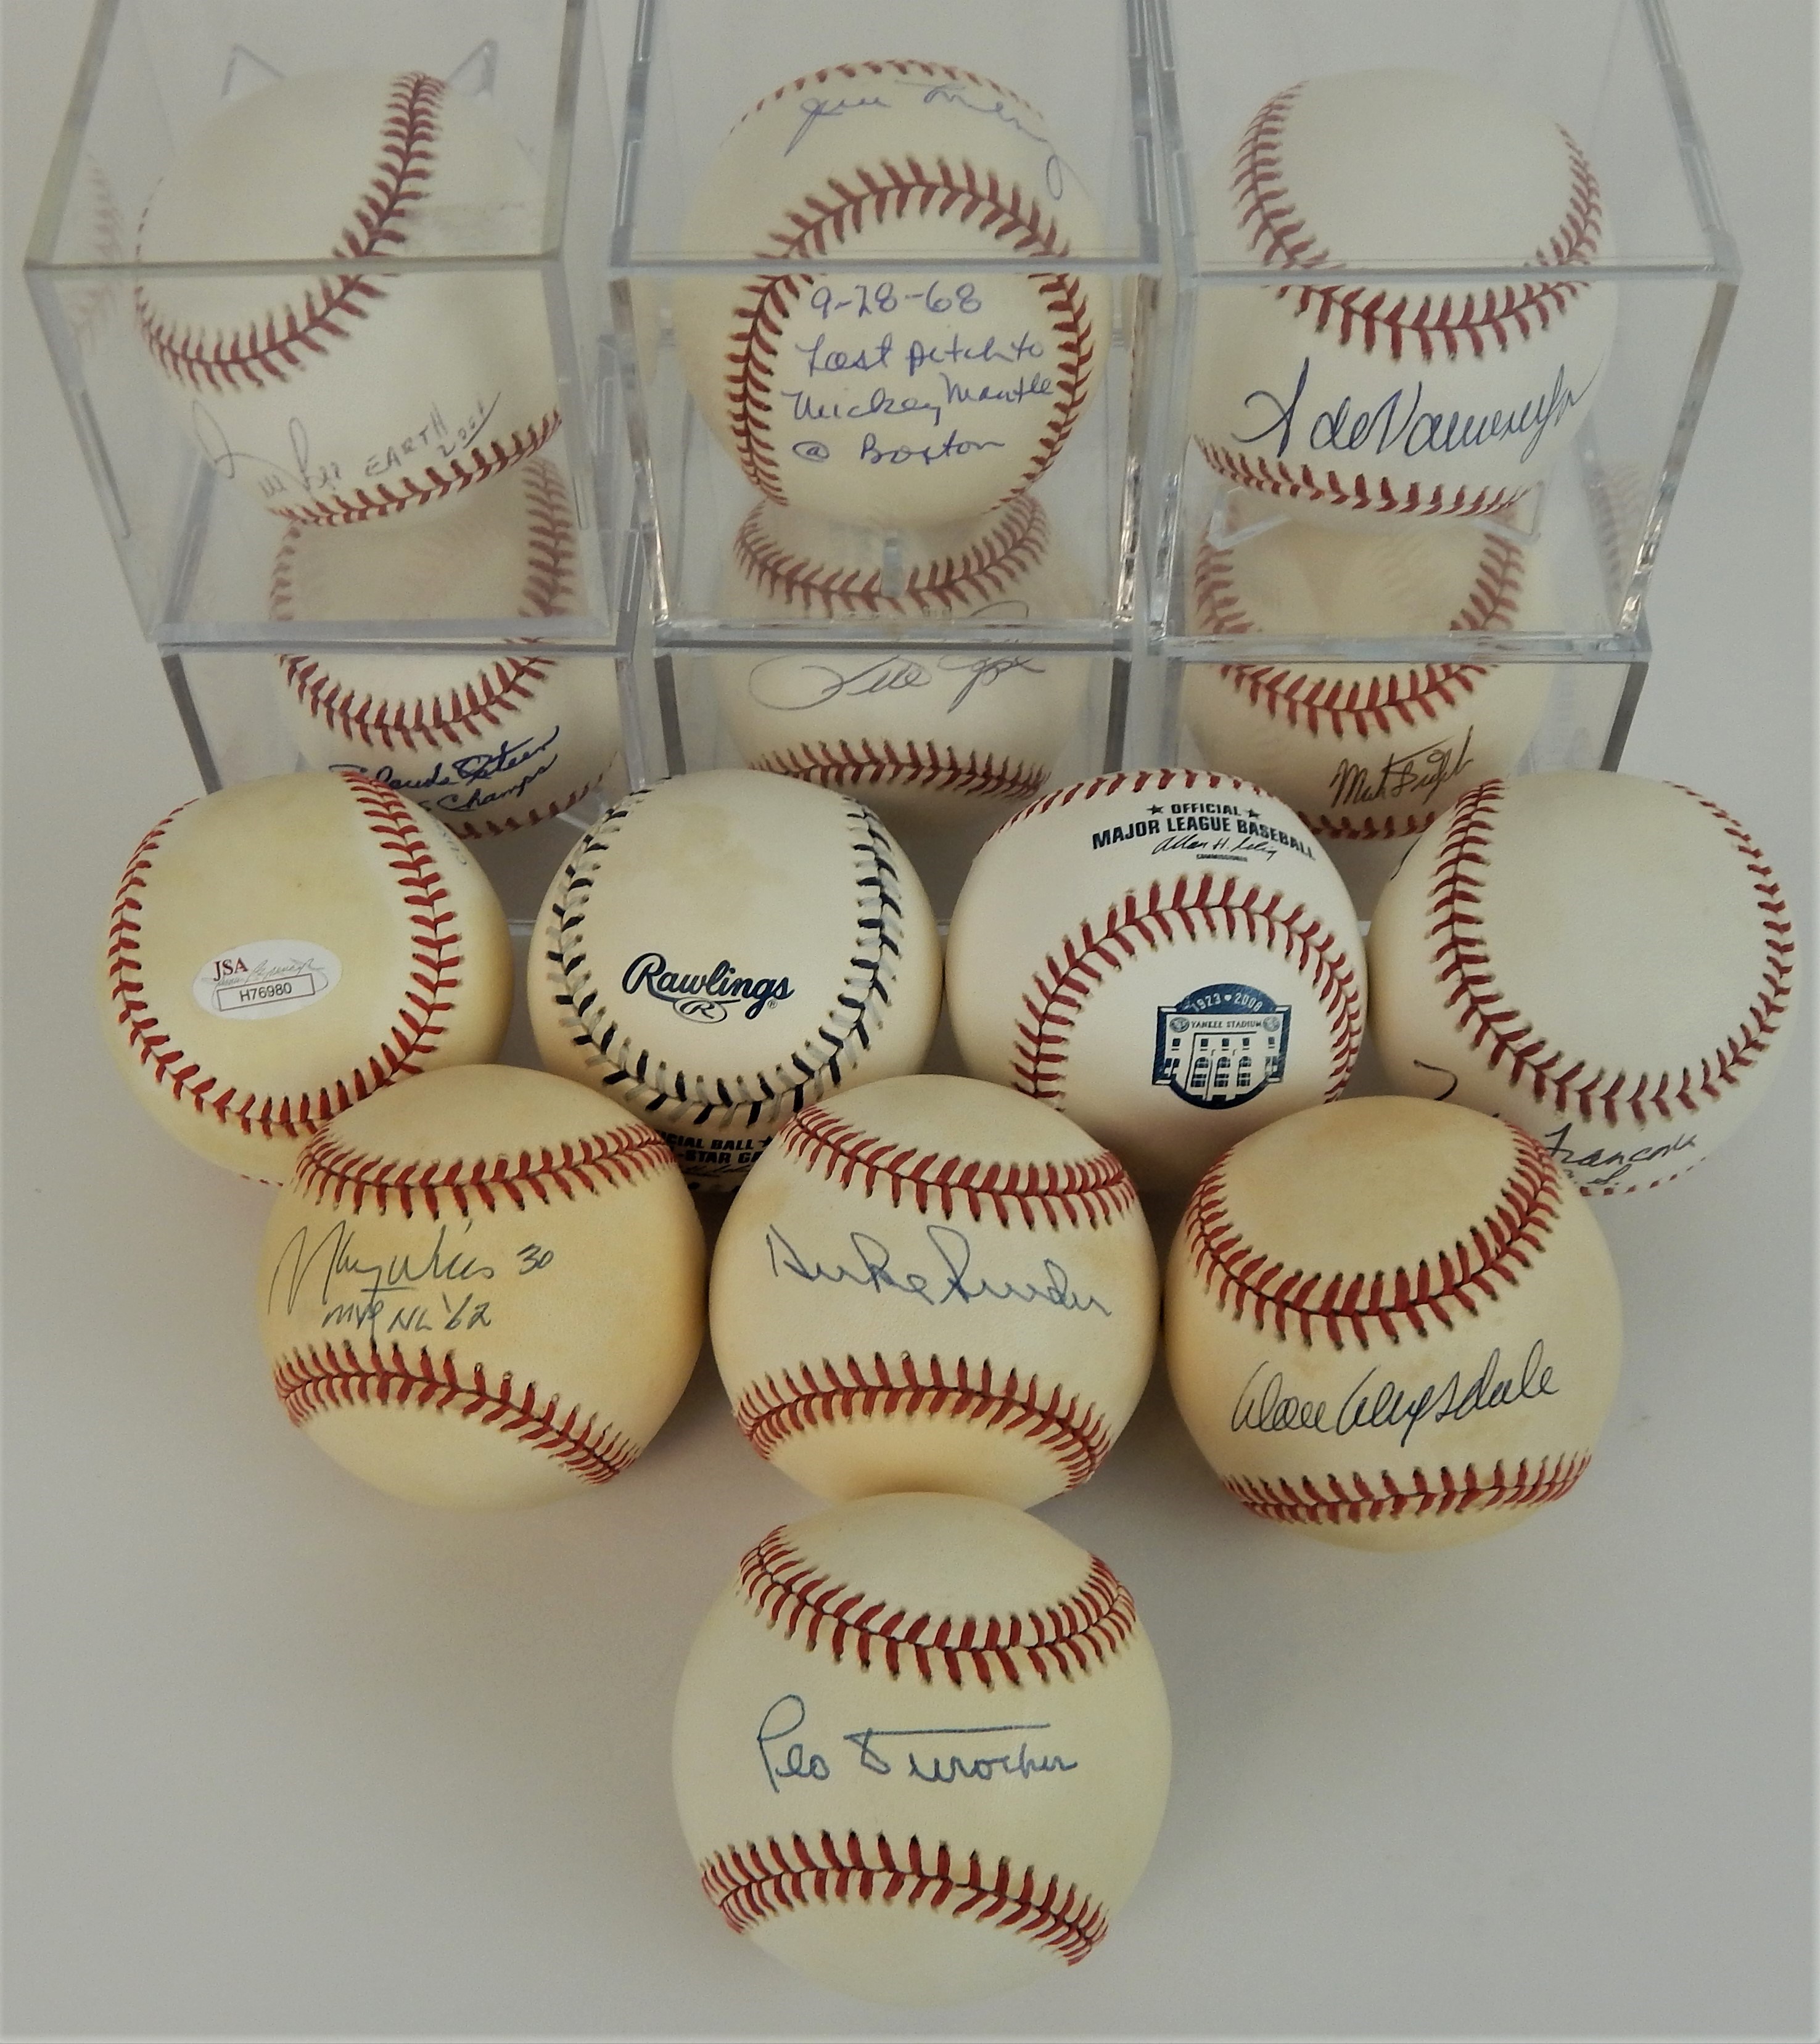 Baseball Autographs - Signed Baseball Collection featuring Drysdale, Snider, Durocher etc. (12)